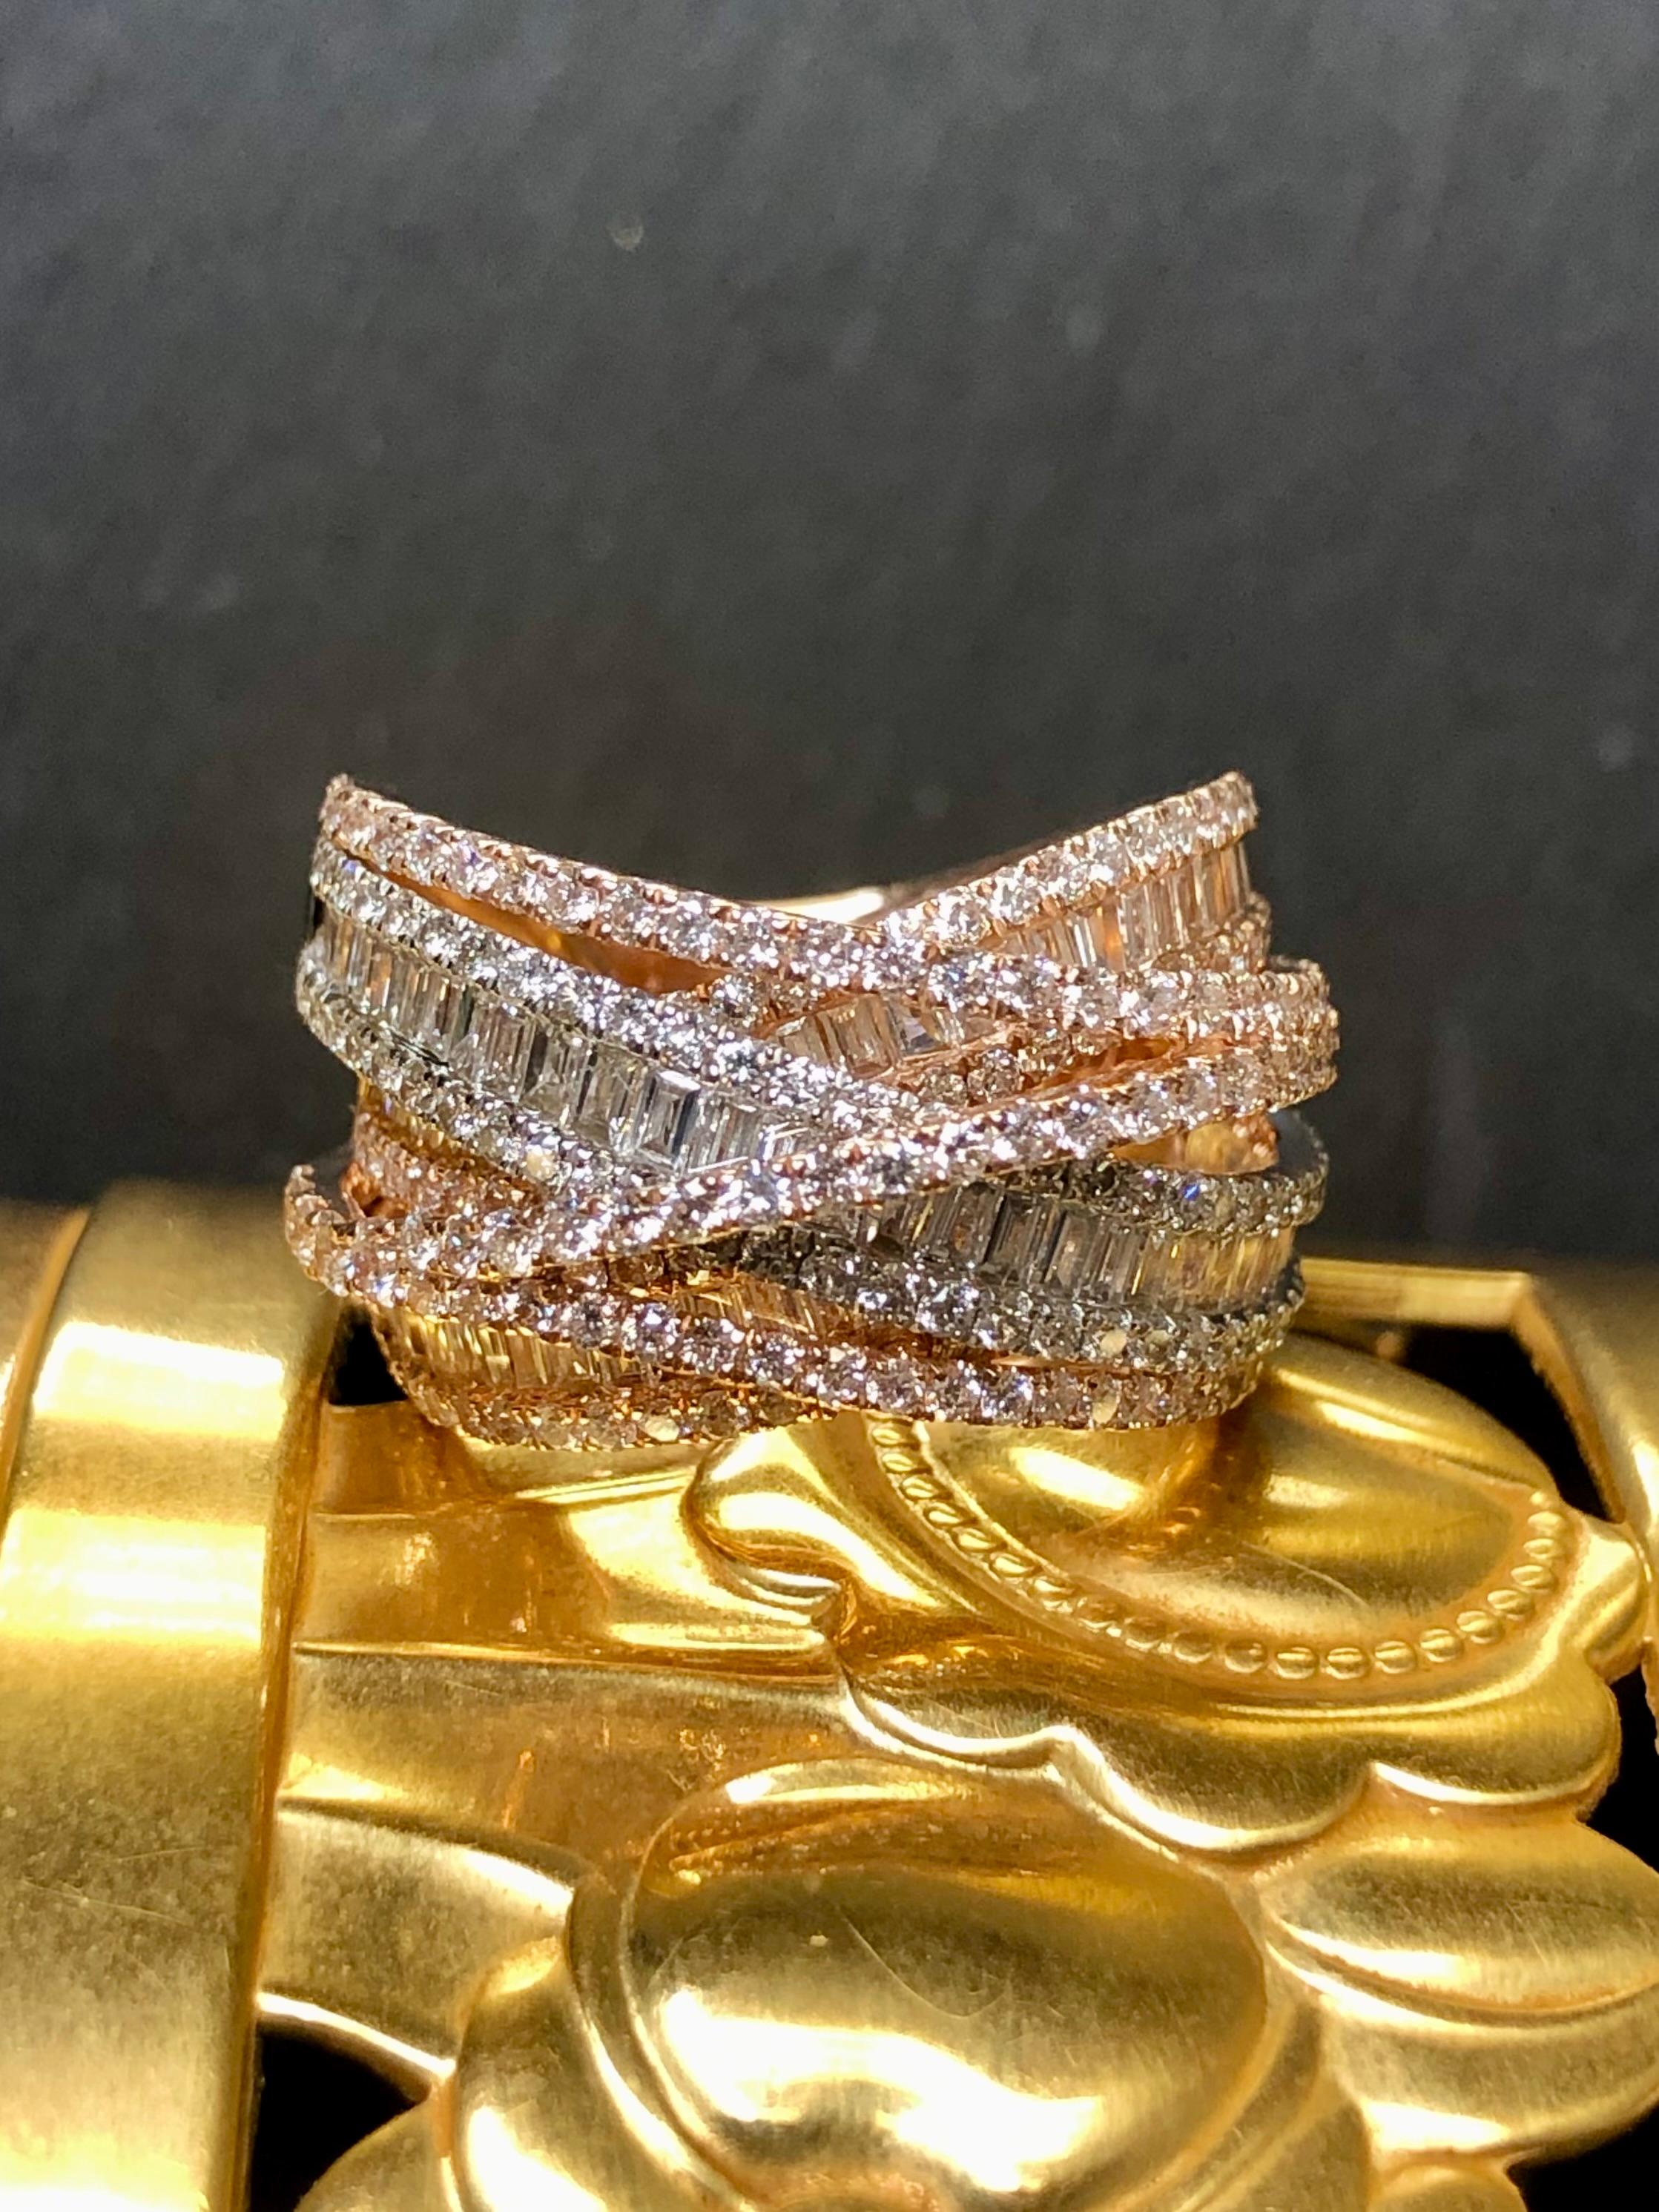 A fabulous crossover style ring by EFFY done in 14k rose and white gold both channel and bead set with approximately 4cttw in H-I color Vs1 to very clean Si1 round and baguette diamonds. Very sparkly and full of life… a gorgeous